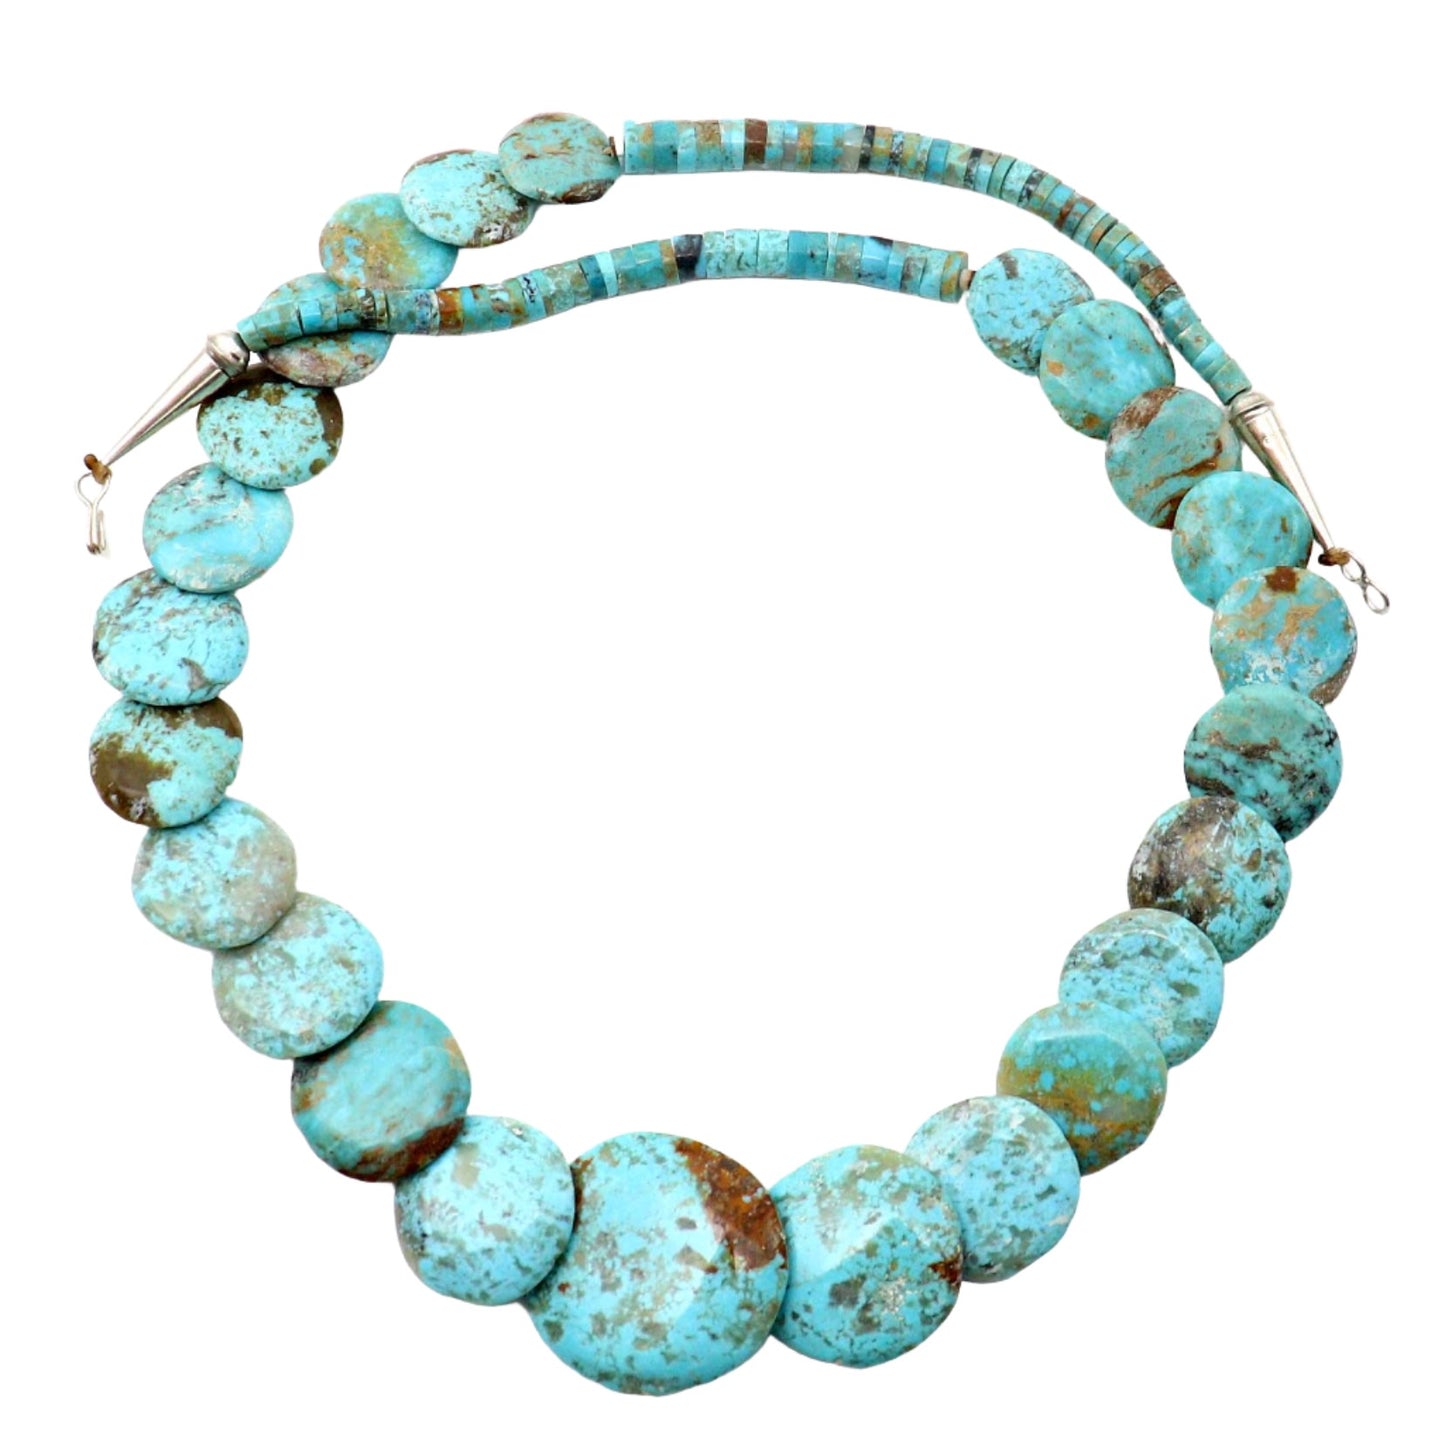 27" Graduated Turquoise Bead Necklace by Garcia